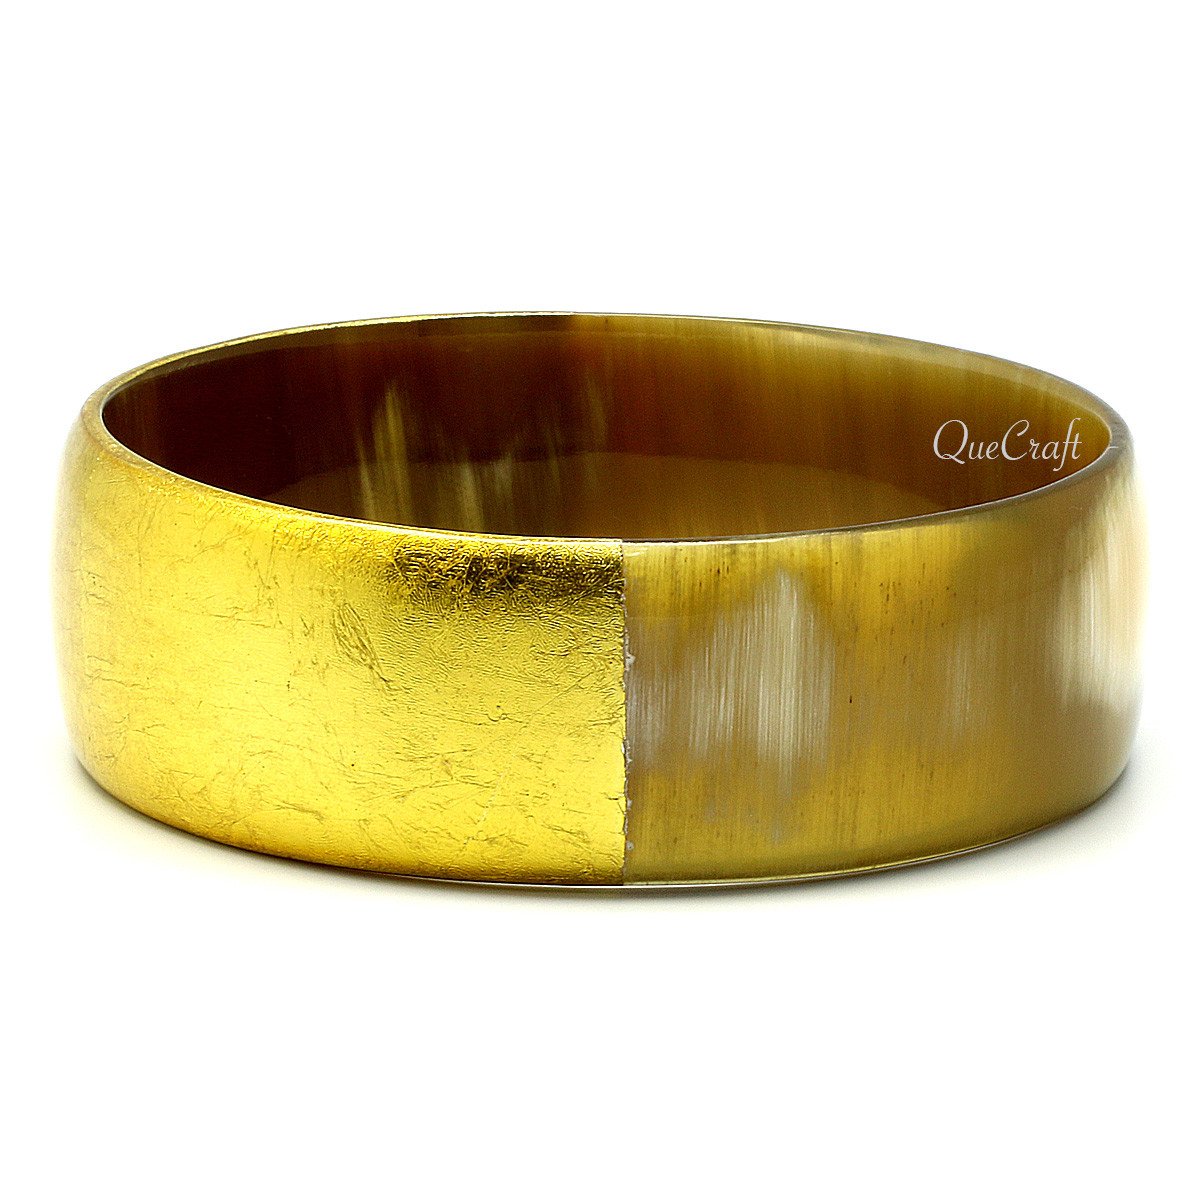 Horn & Lacquer Bangle Bracelet #7270 - HORN JEWELRY